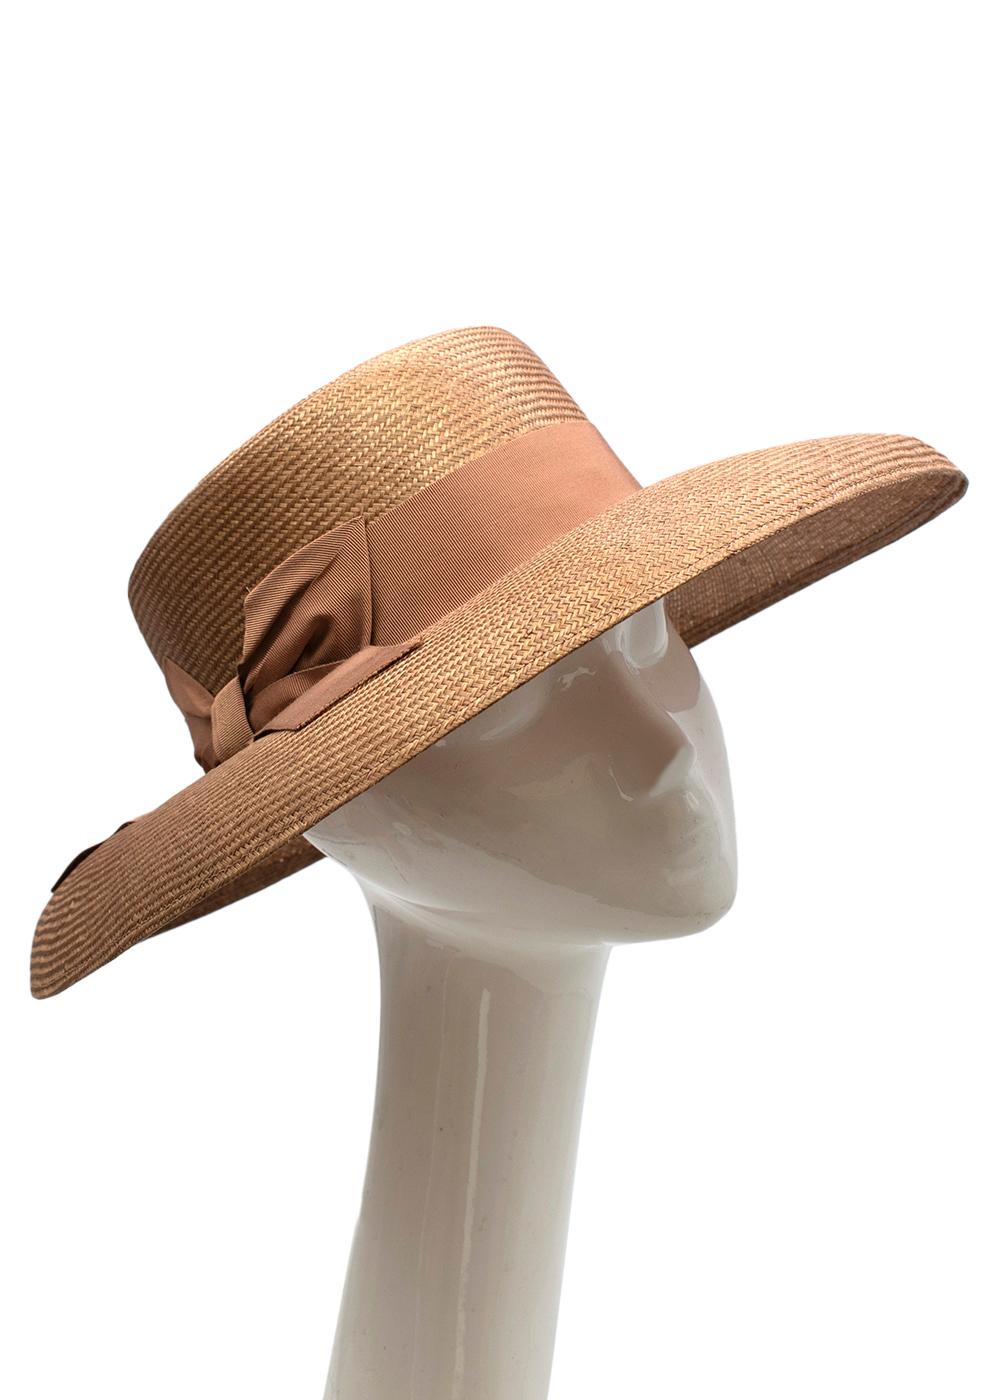 Borsalino Sophie Panama Semi Crochet Hat - Size L

-Straw hat with rounded edges
-Beige ribbon trim and medium sized brim
-Printed logo detail

Material:

Straw 

9.5 excellent 

PLEASE NOTE, THESE ITEMS ARE PRE-OWNED AND MAY SHOW SIGNS OF BEING